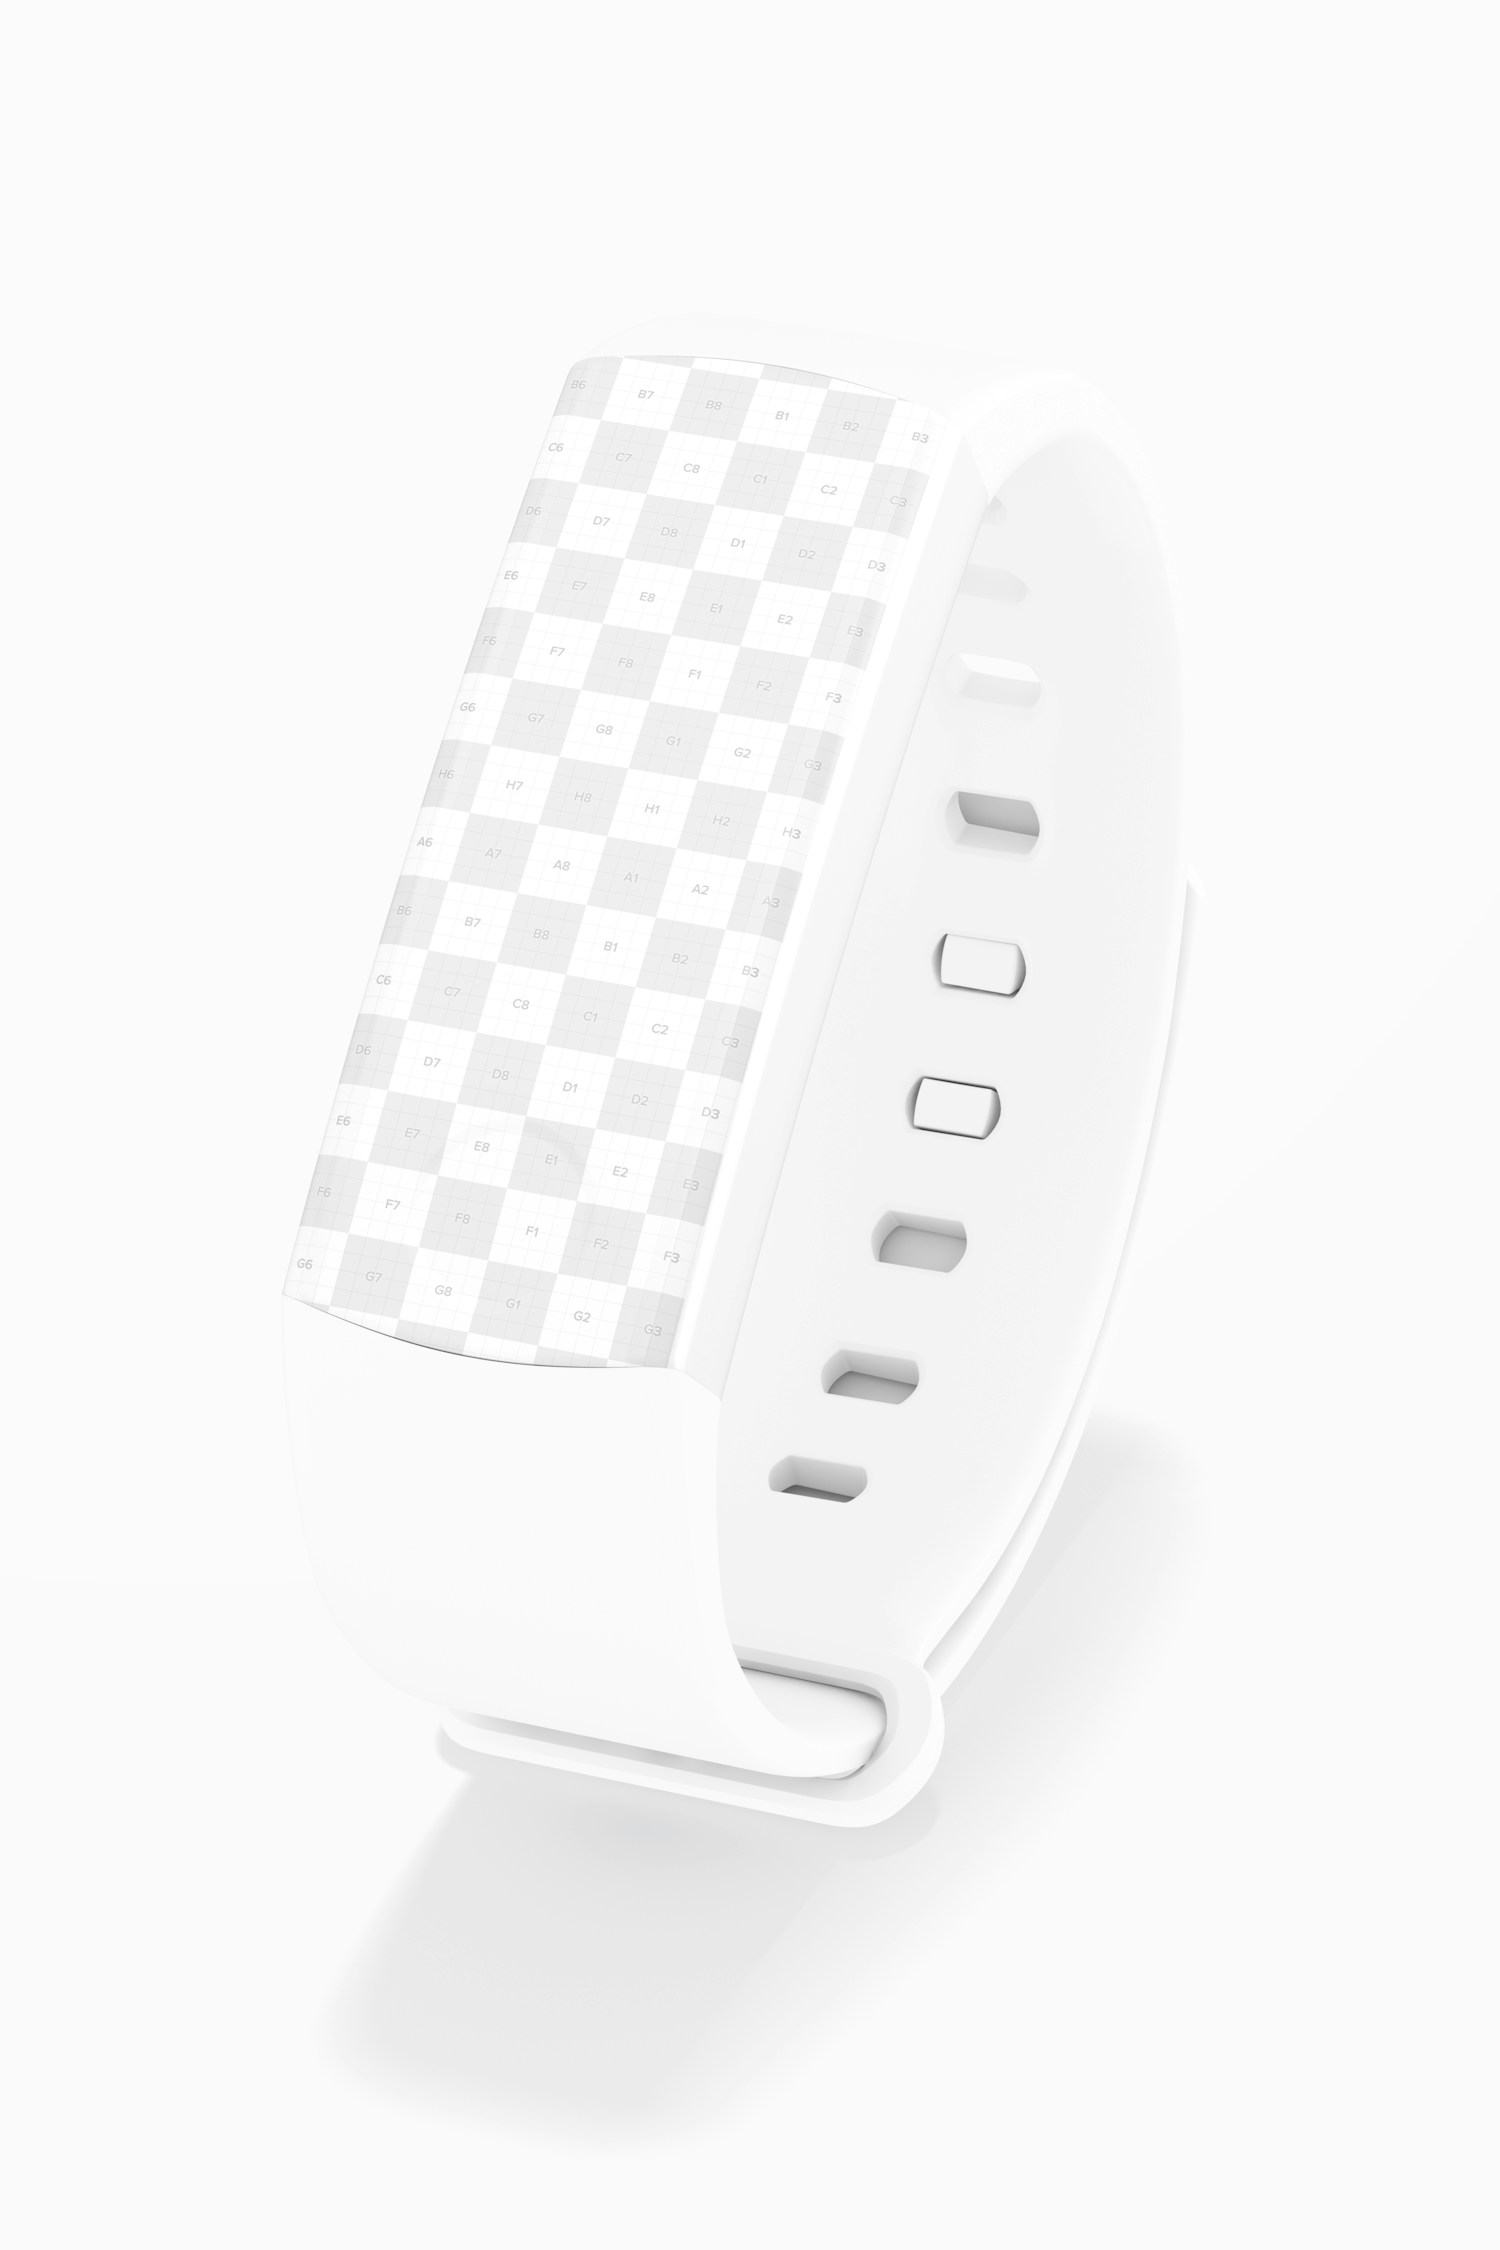 Huawei Fit Honor Band 3 Smart Watch Mockup, Top View